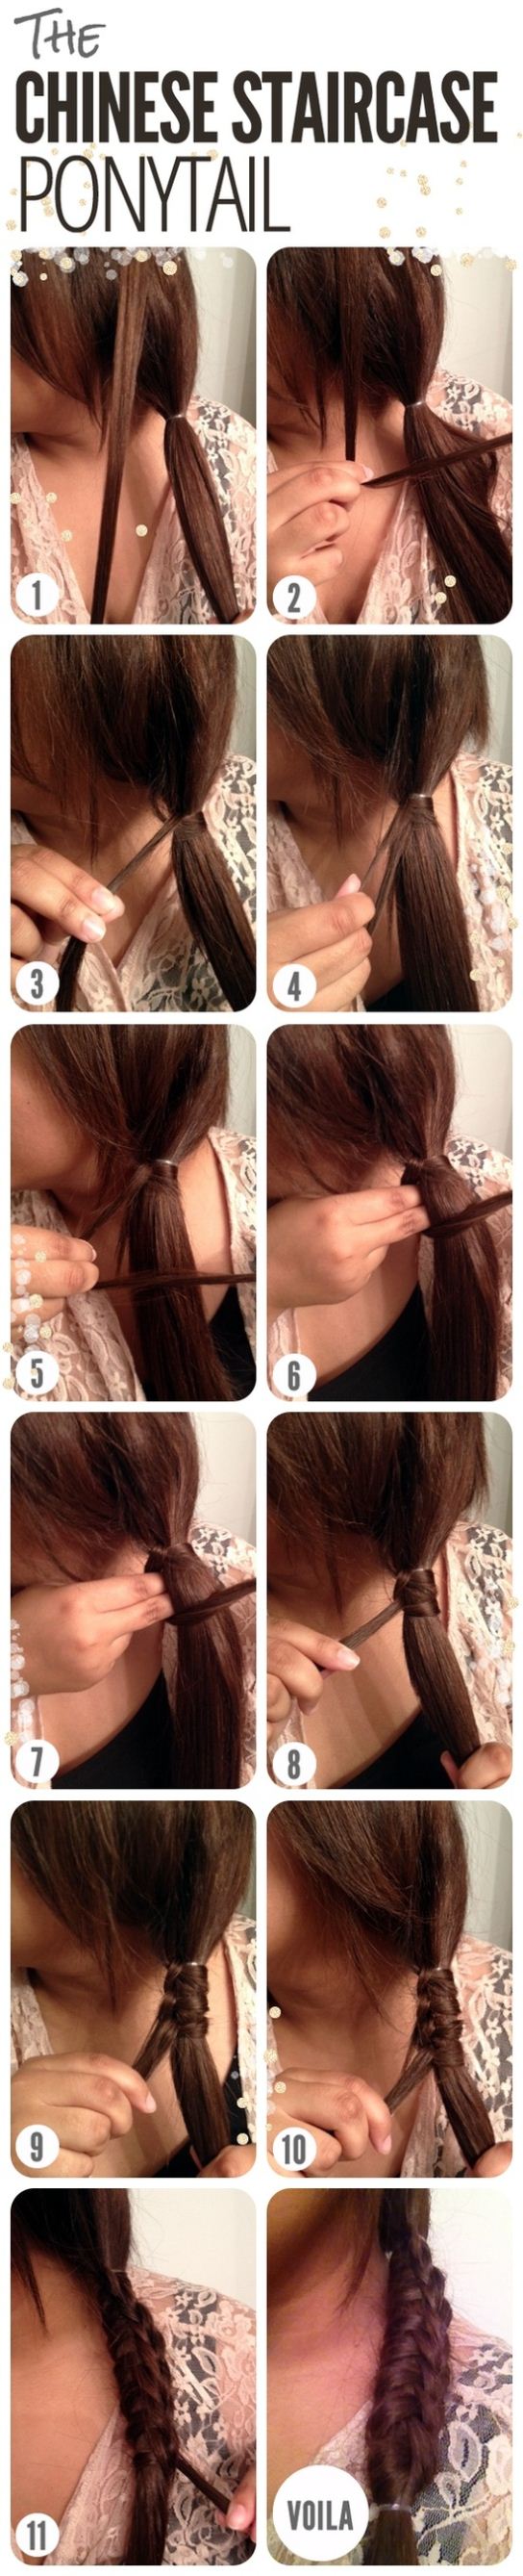 DIY Chinese Staircase Ponytail Hairstyle via